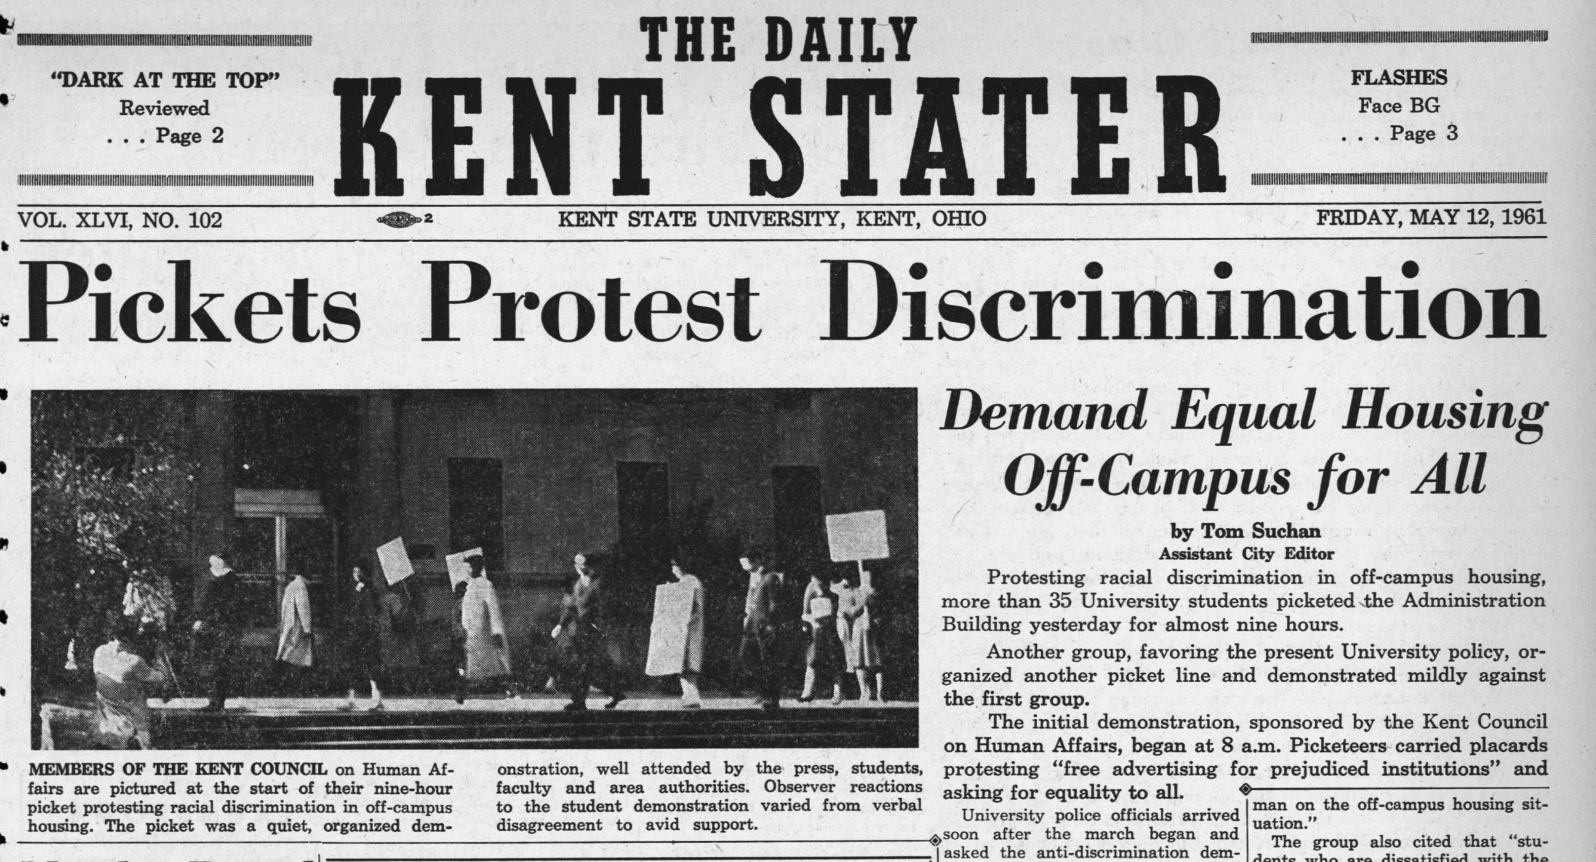 Daily Kent Stater, May 11, 1961, page 1.